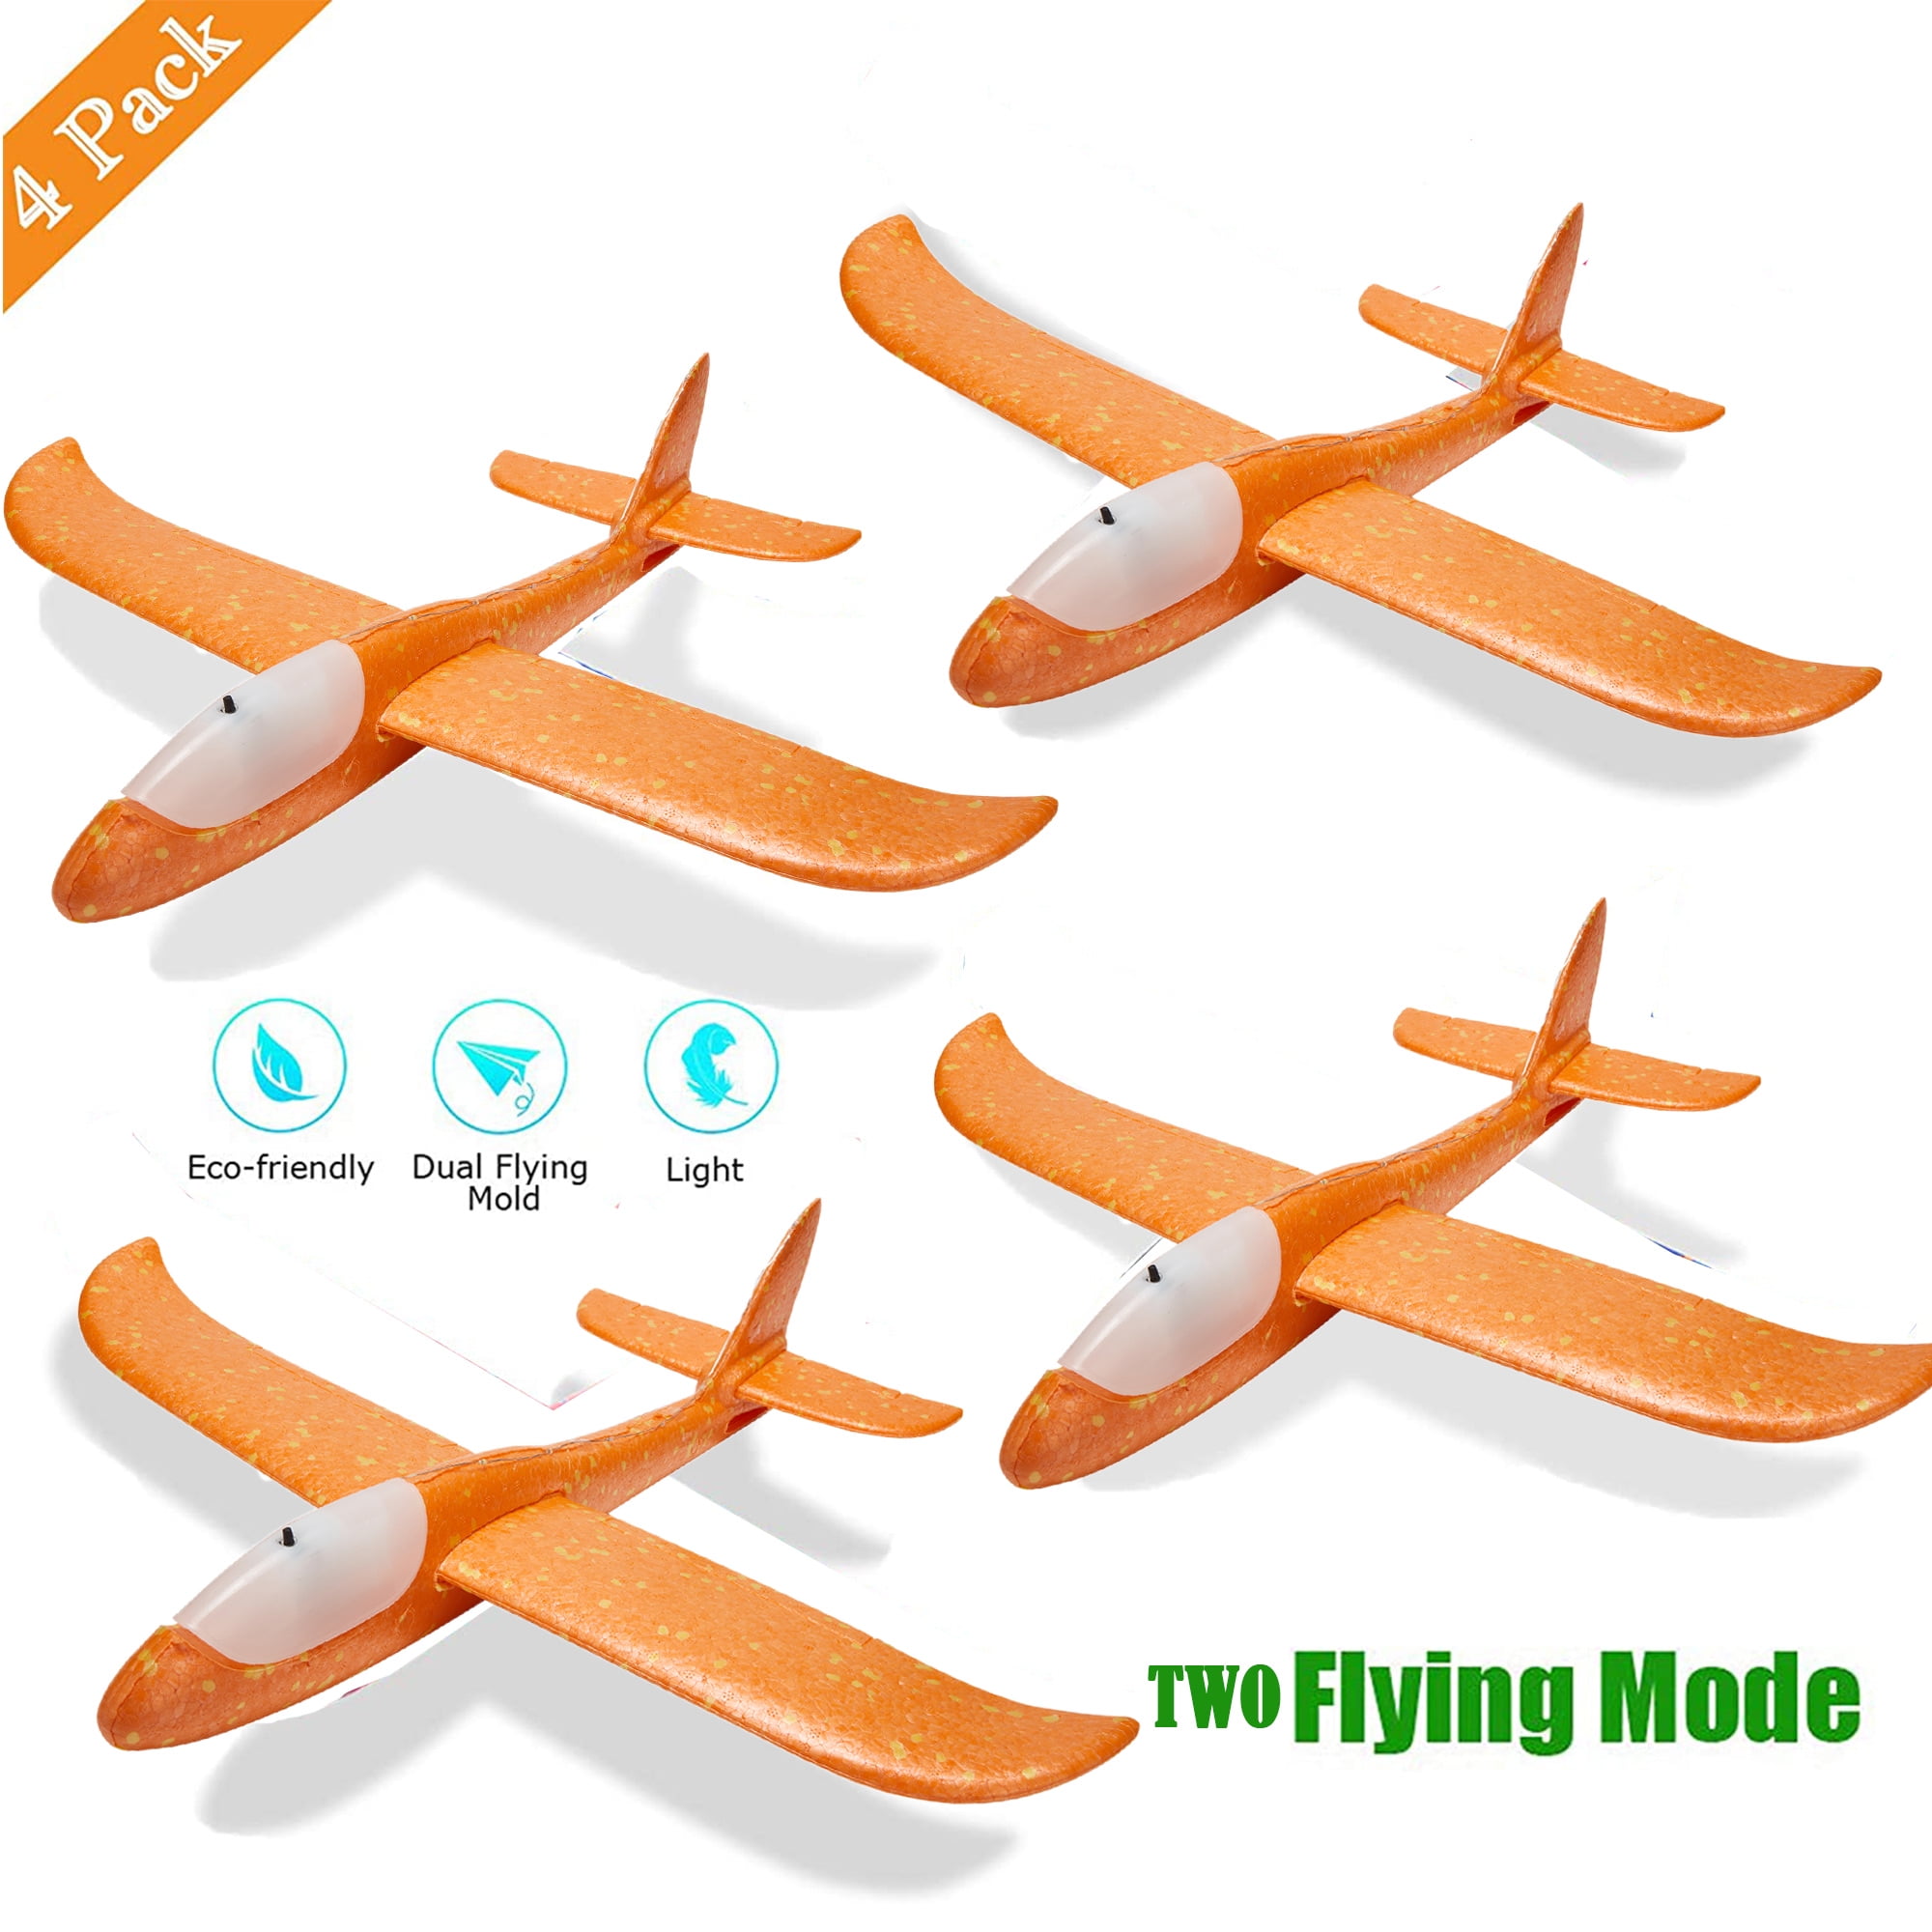 Electric Airplane Toys Foam Education Glider Aeroplane for boys Adults Rechargeable 2 Flight Mode Throwing Plane Outdoor Sport Toy Family Flying Game Toy,Styrofoam Airplanes,Gift for Kids Teens 